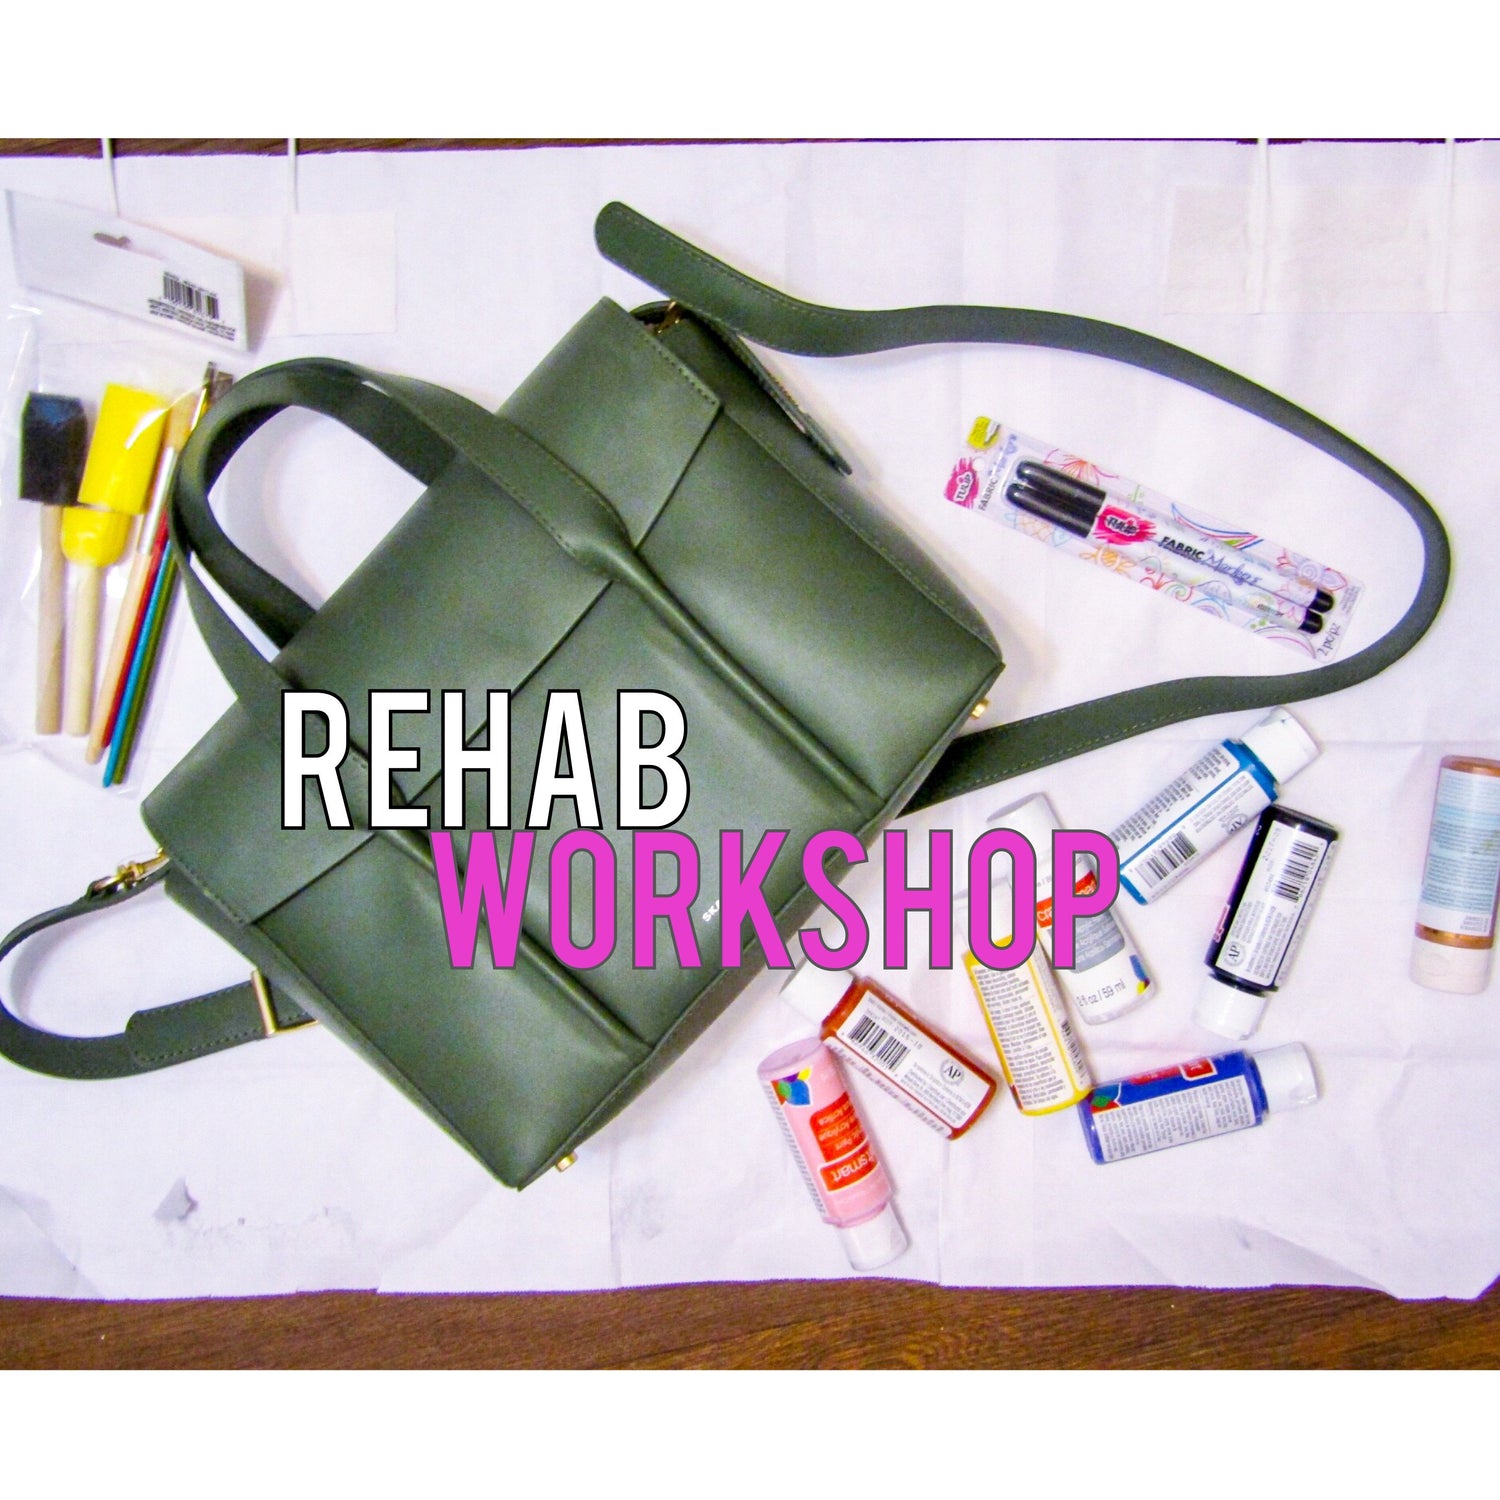 Coach Rehab project blog: Guide to dates of vintage Coach bags